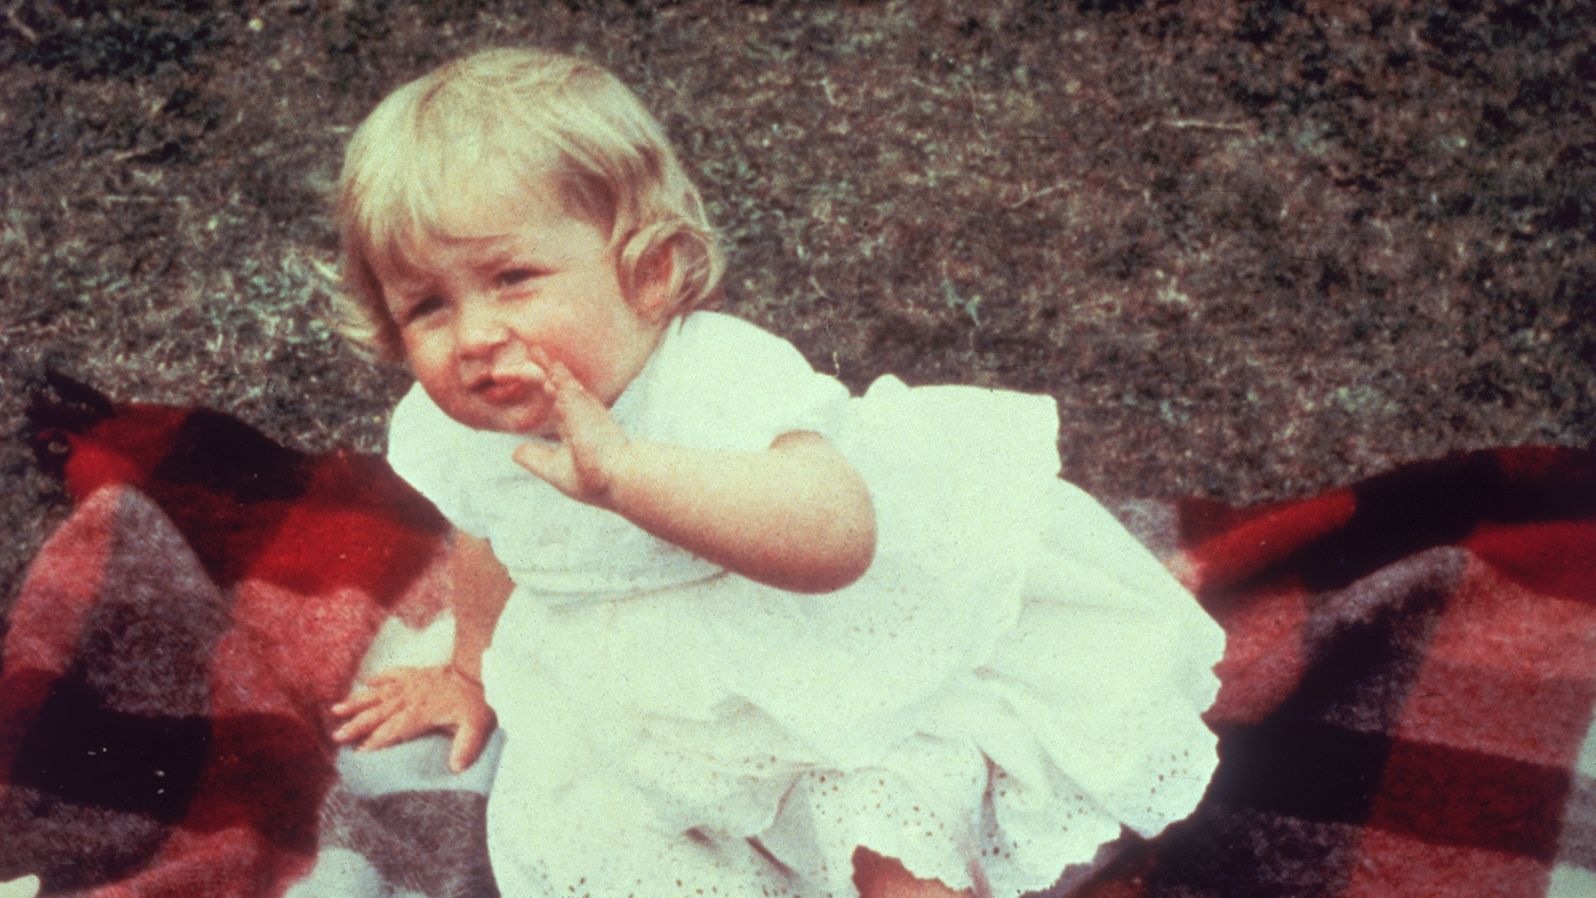 Diana, seen here on her first birthday, was born Diana Frances Spencer on July 1, 1961. She was born into a noble family in Sandringham, England. Her father, John, was Viscount Althorp before becoming the 8th Earl Spencer in 1975.